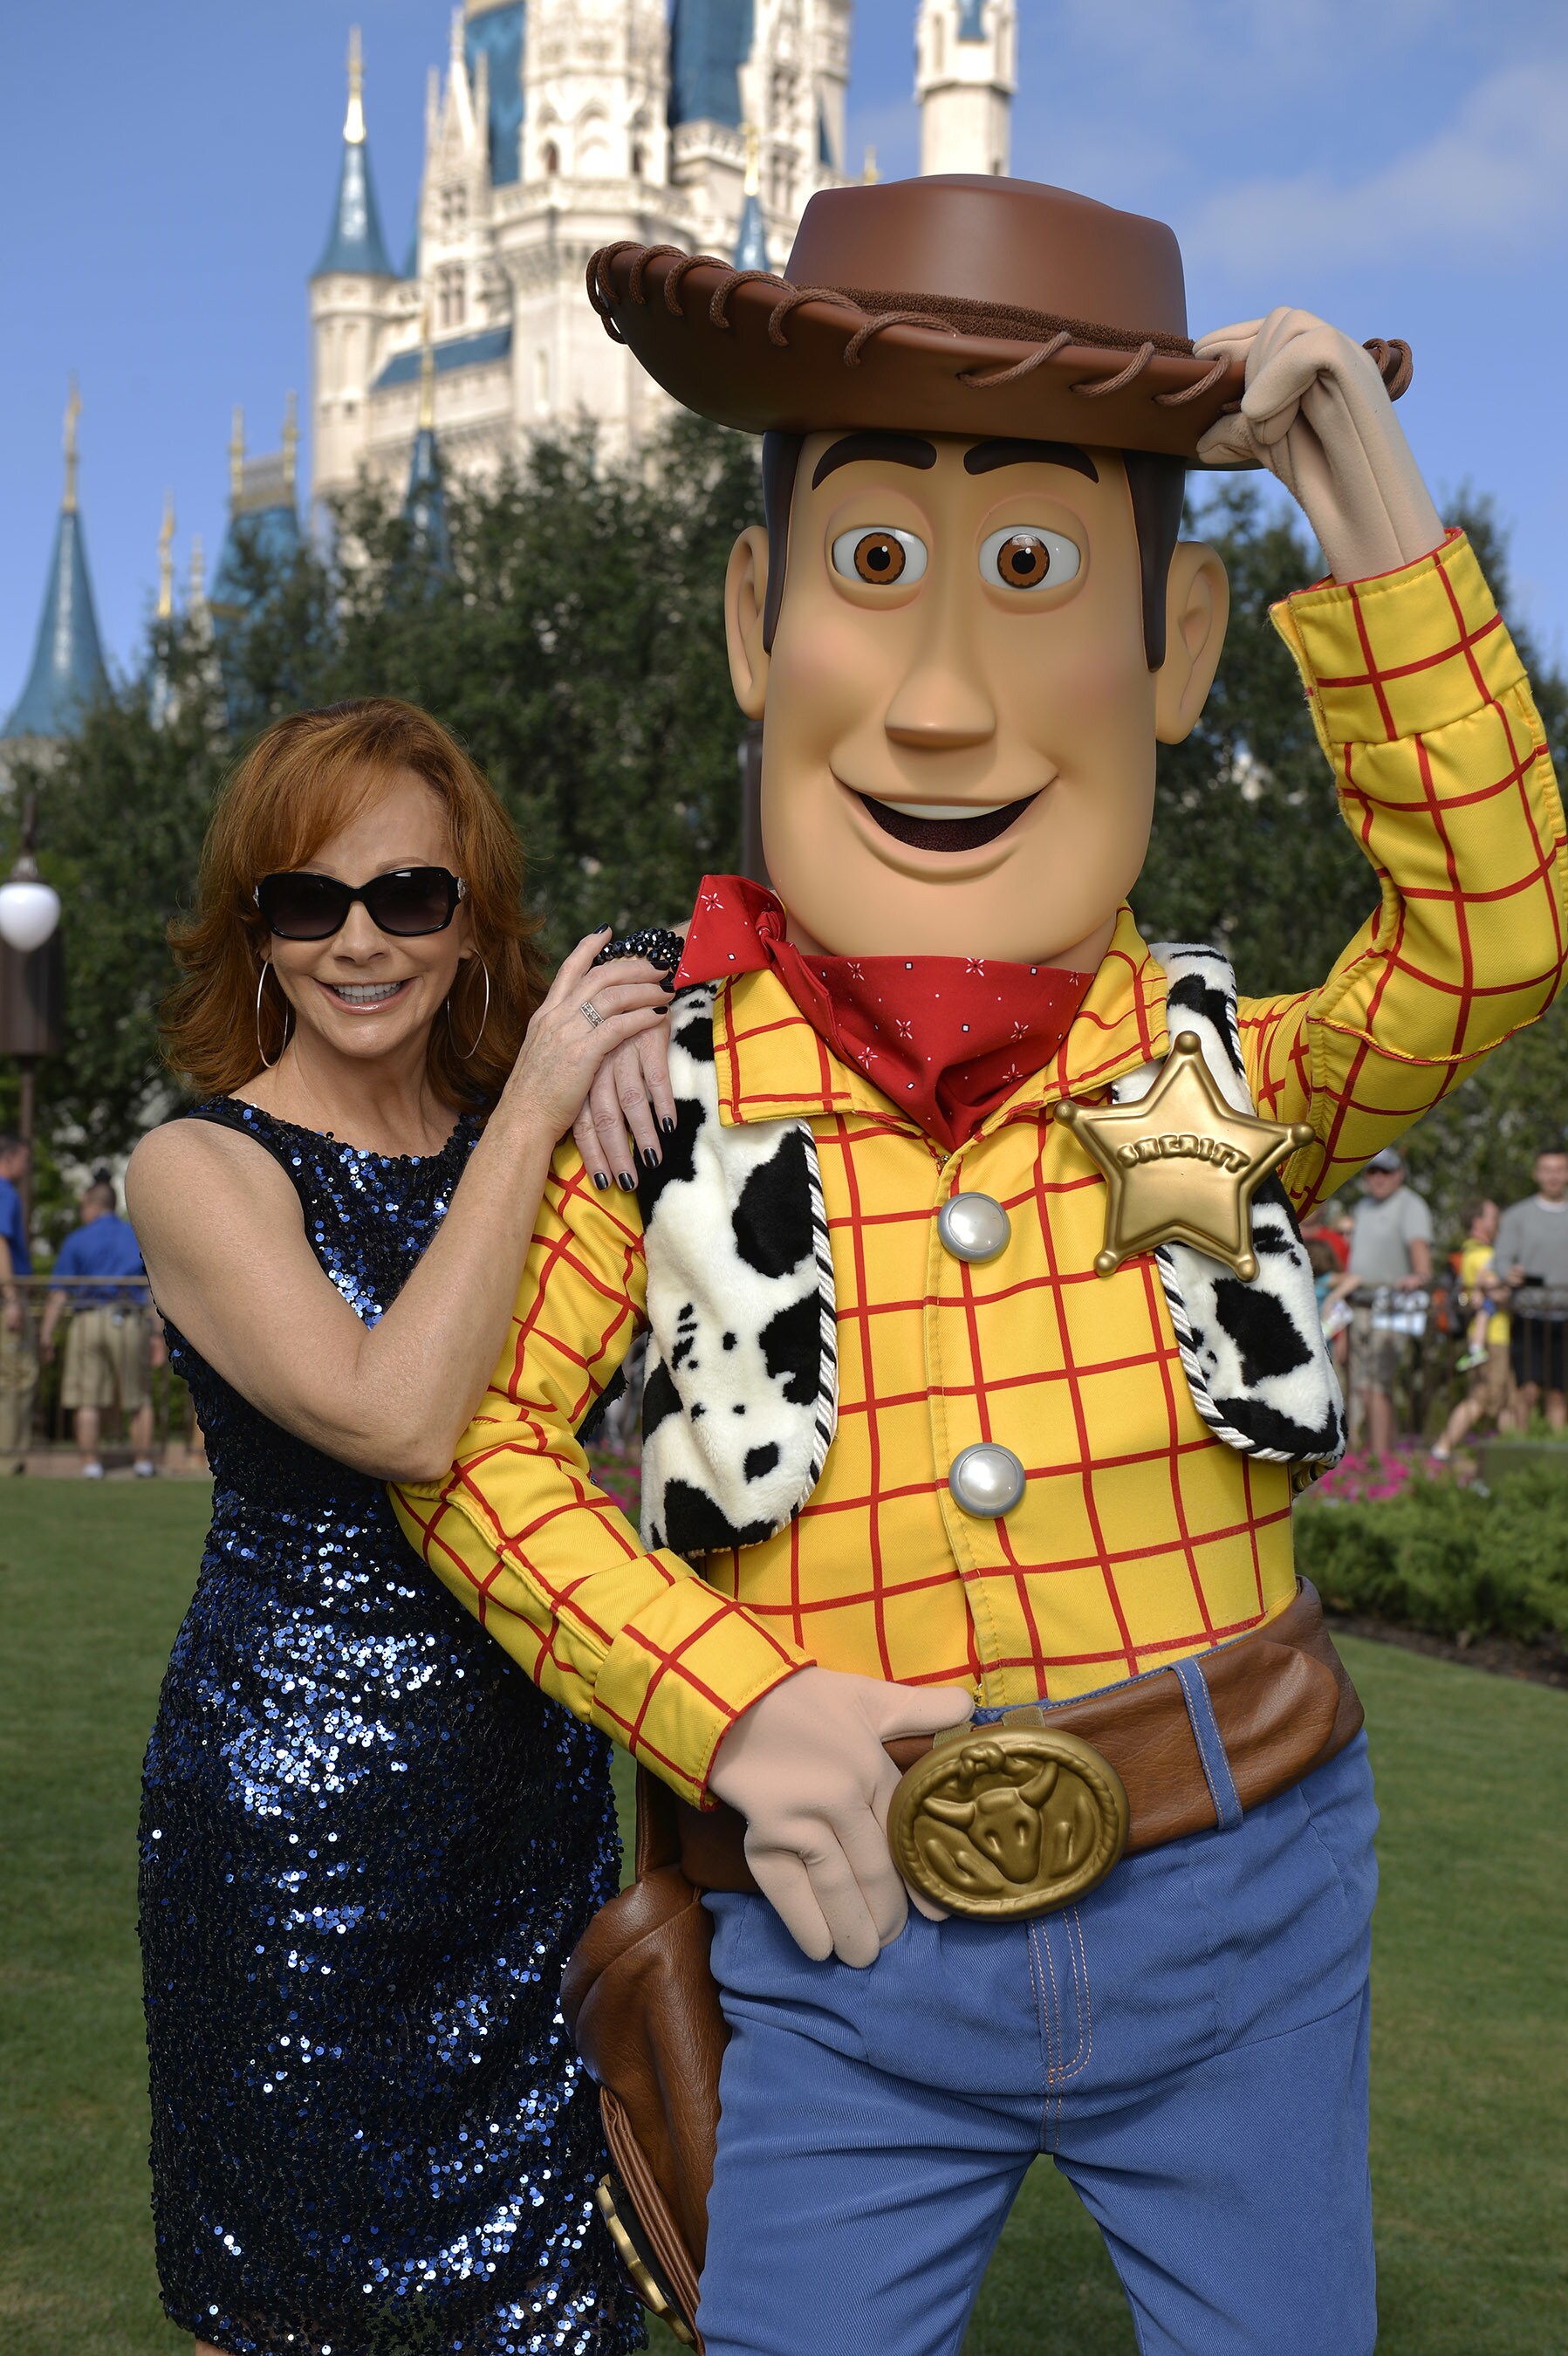 Reba McEntire poses Nov. 11, 2015 with Woody from Disney-Pixar "Toy Story" during a break from ta...